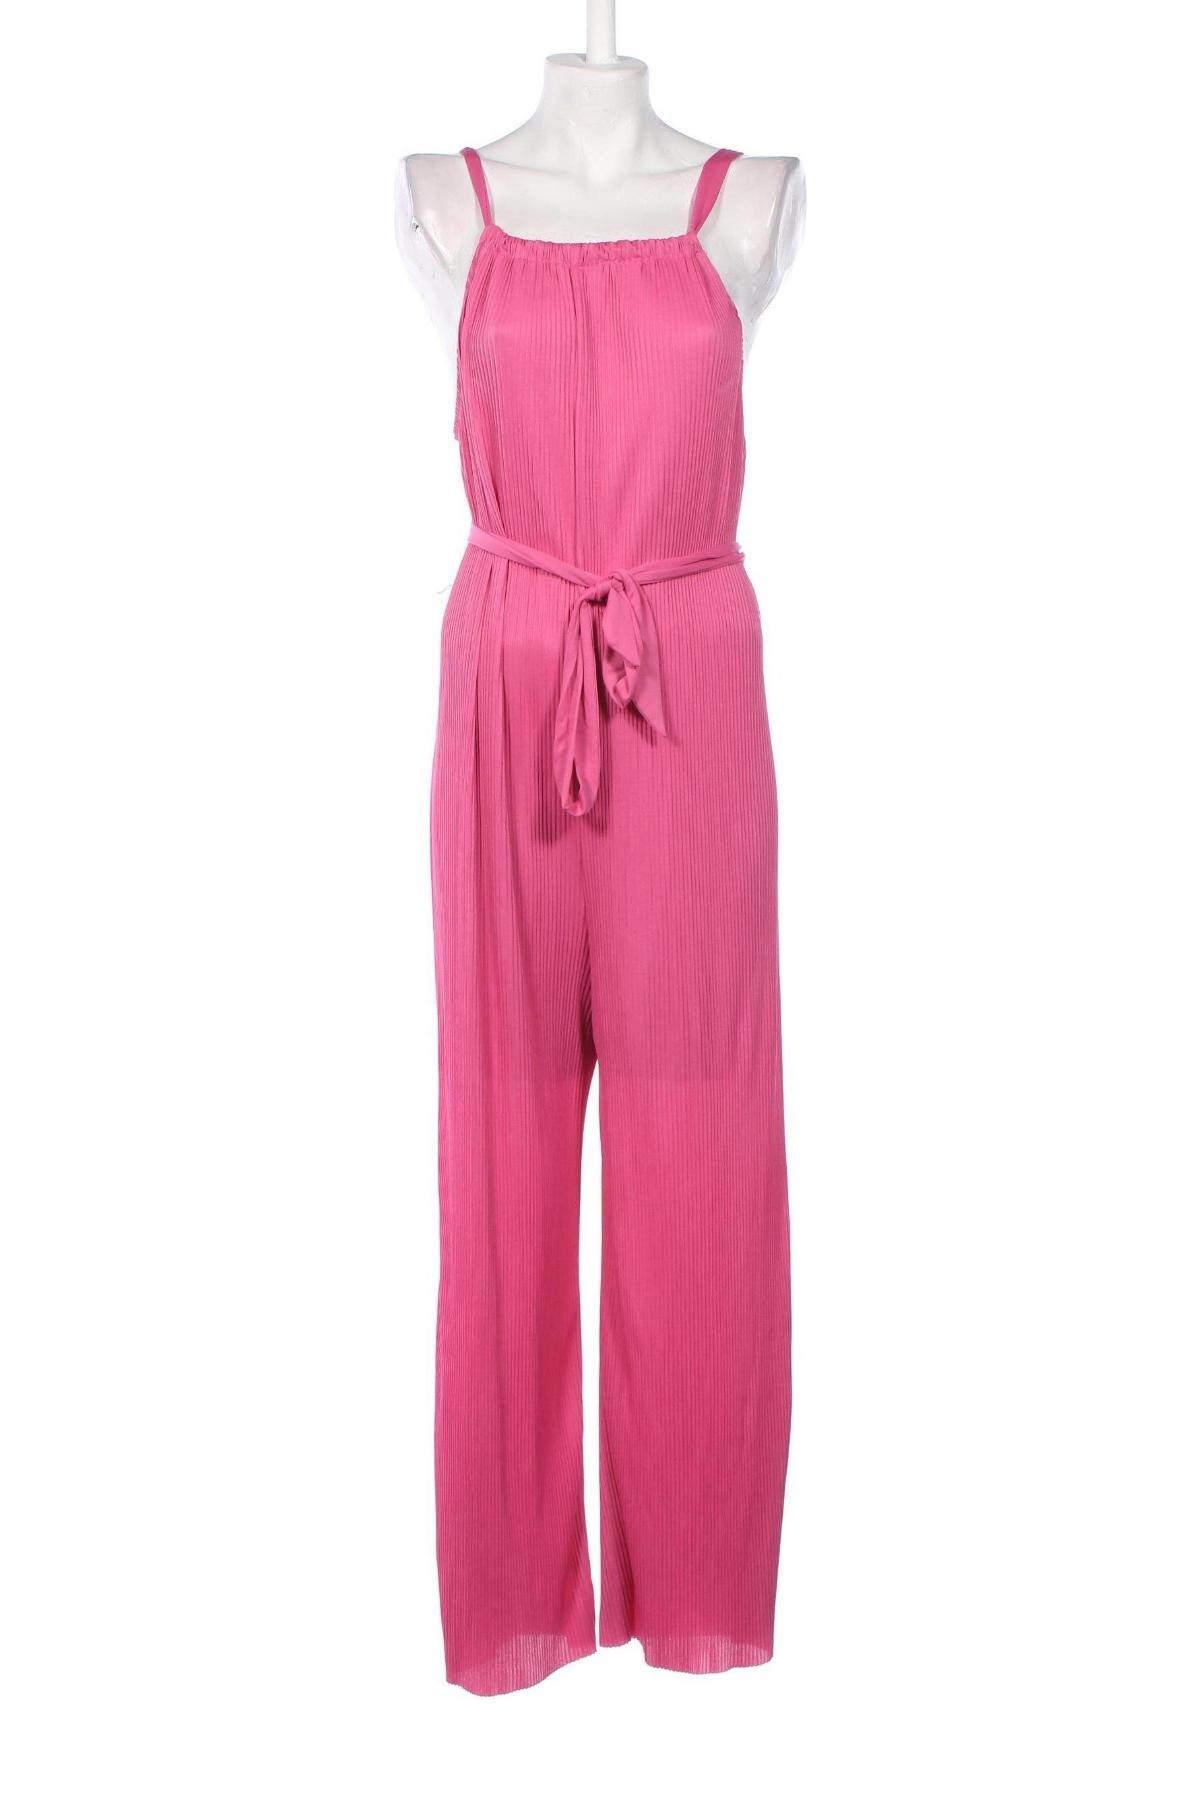 Damen Overall LeGer By Lena Gercke X About you, Größe S, Farbe Rosa, Preis € 19,18